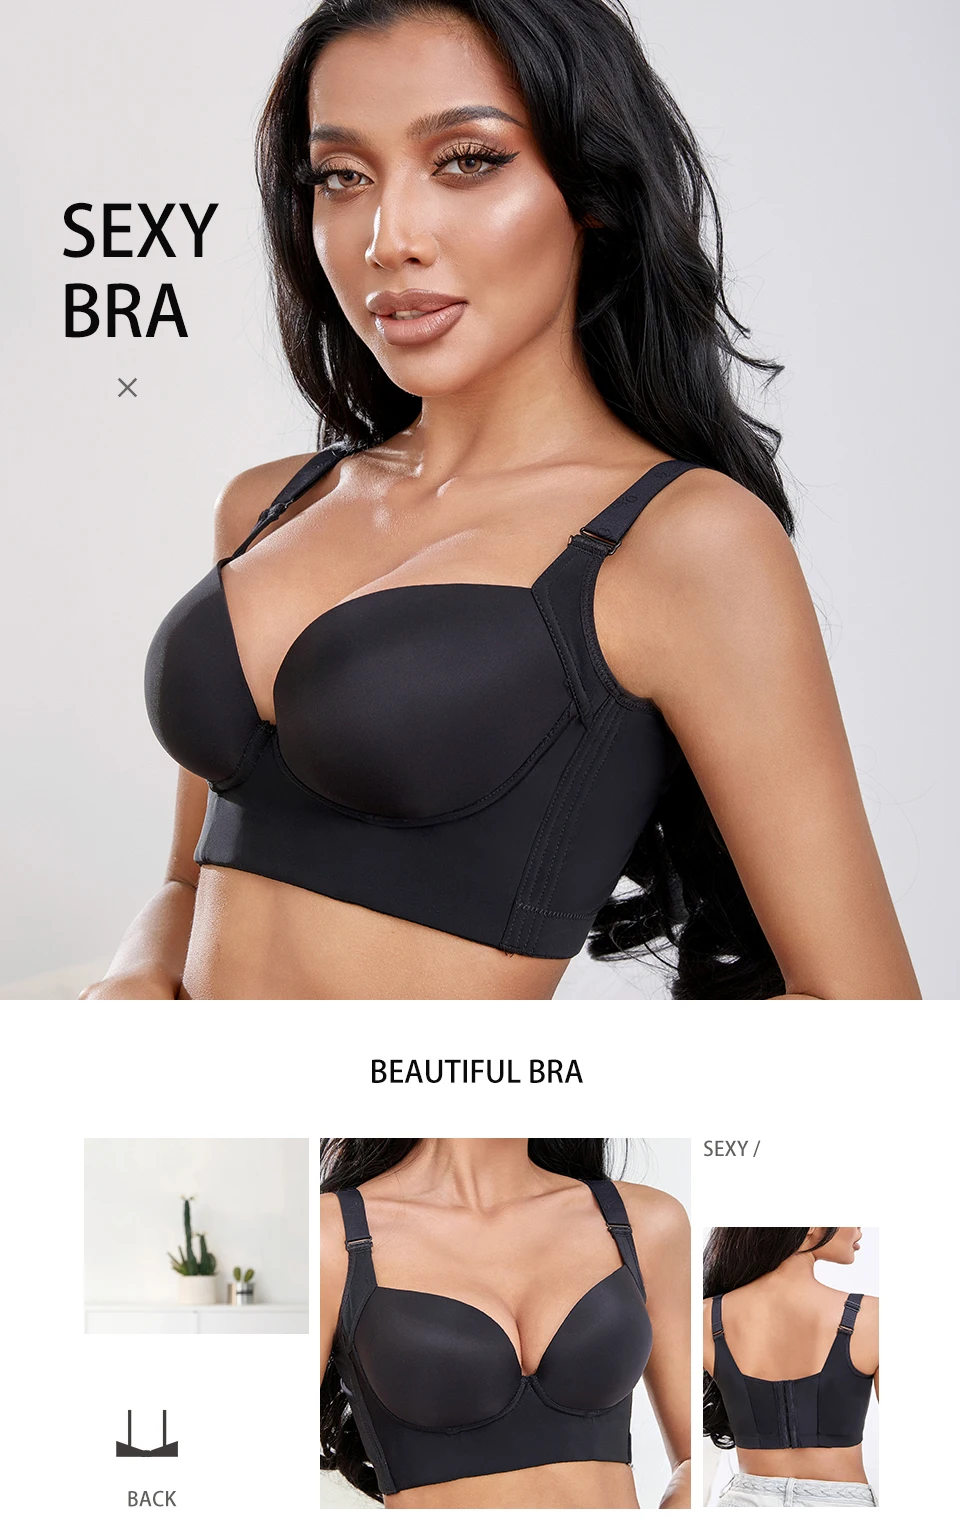 2023 New Sexy Underwear For Women 42/95 44/100 46/105 48//110 50/115 DE  Push Up Large Bras With Extra Breasts Lingerie